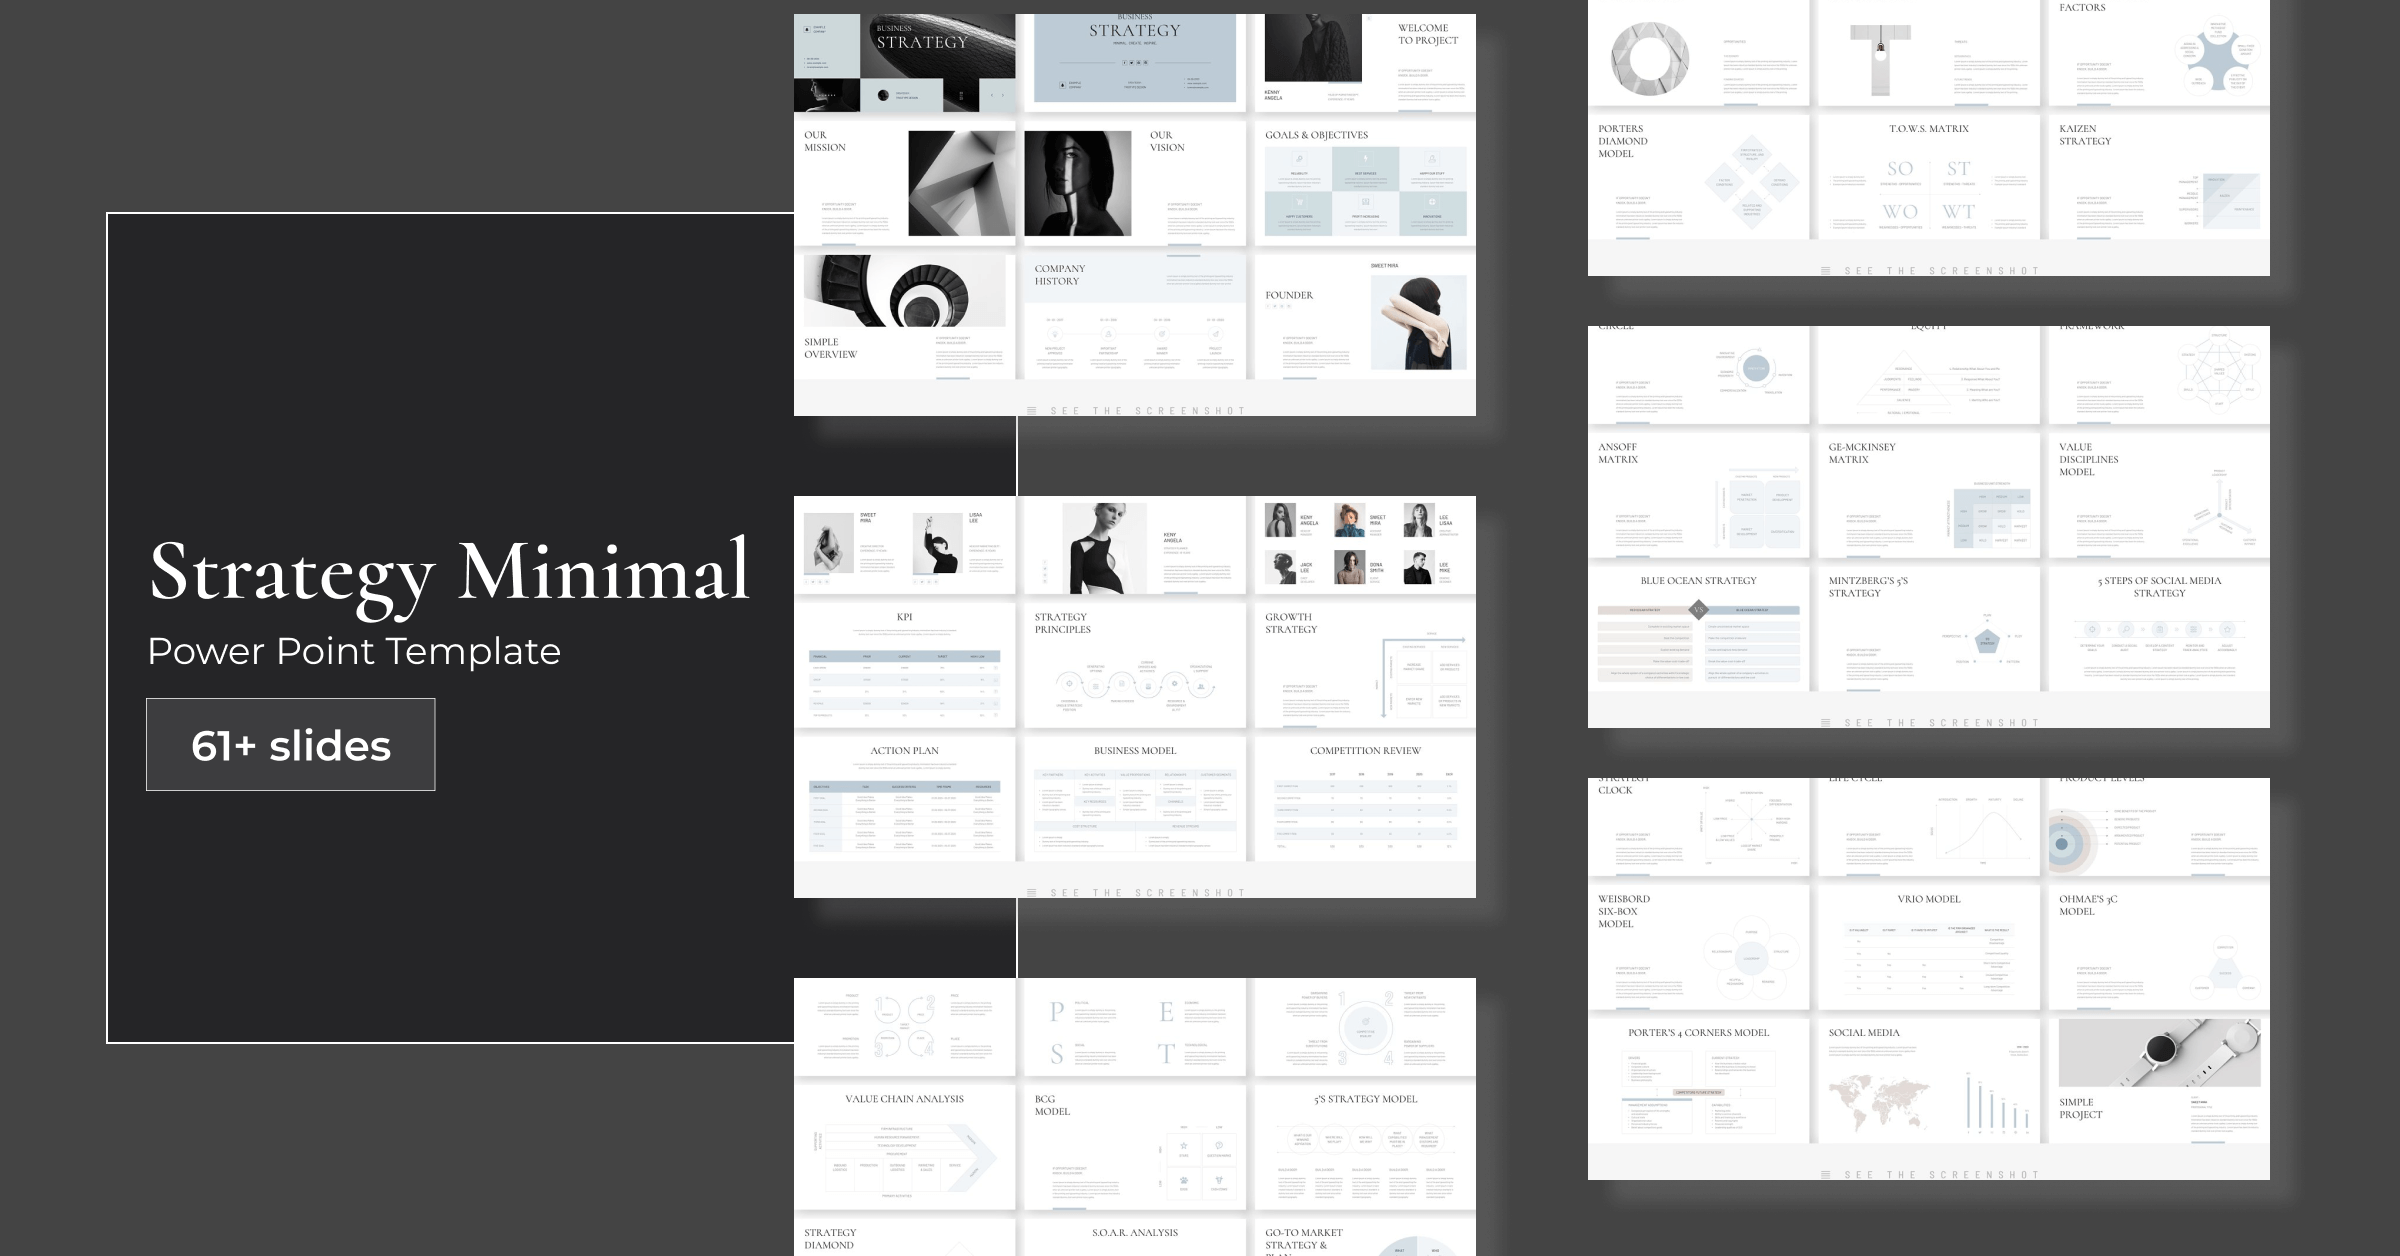 Strategy minimal powerpoint template facebook.